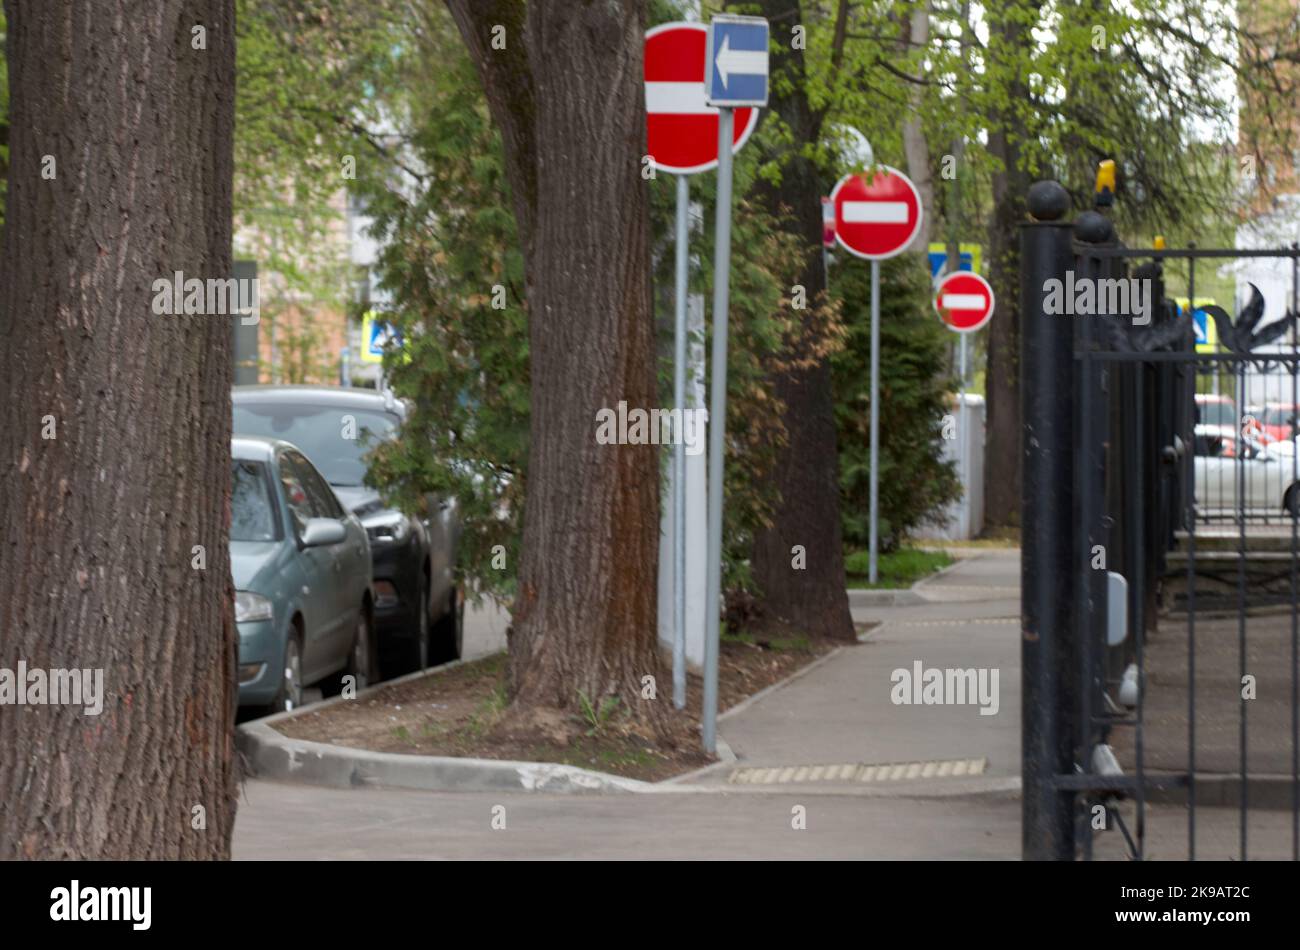 Absolute ban. Three road signs no entry in a row on a city street Stock Photo